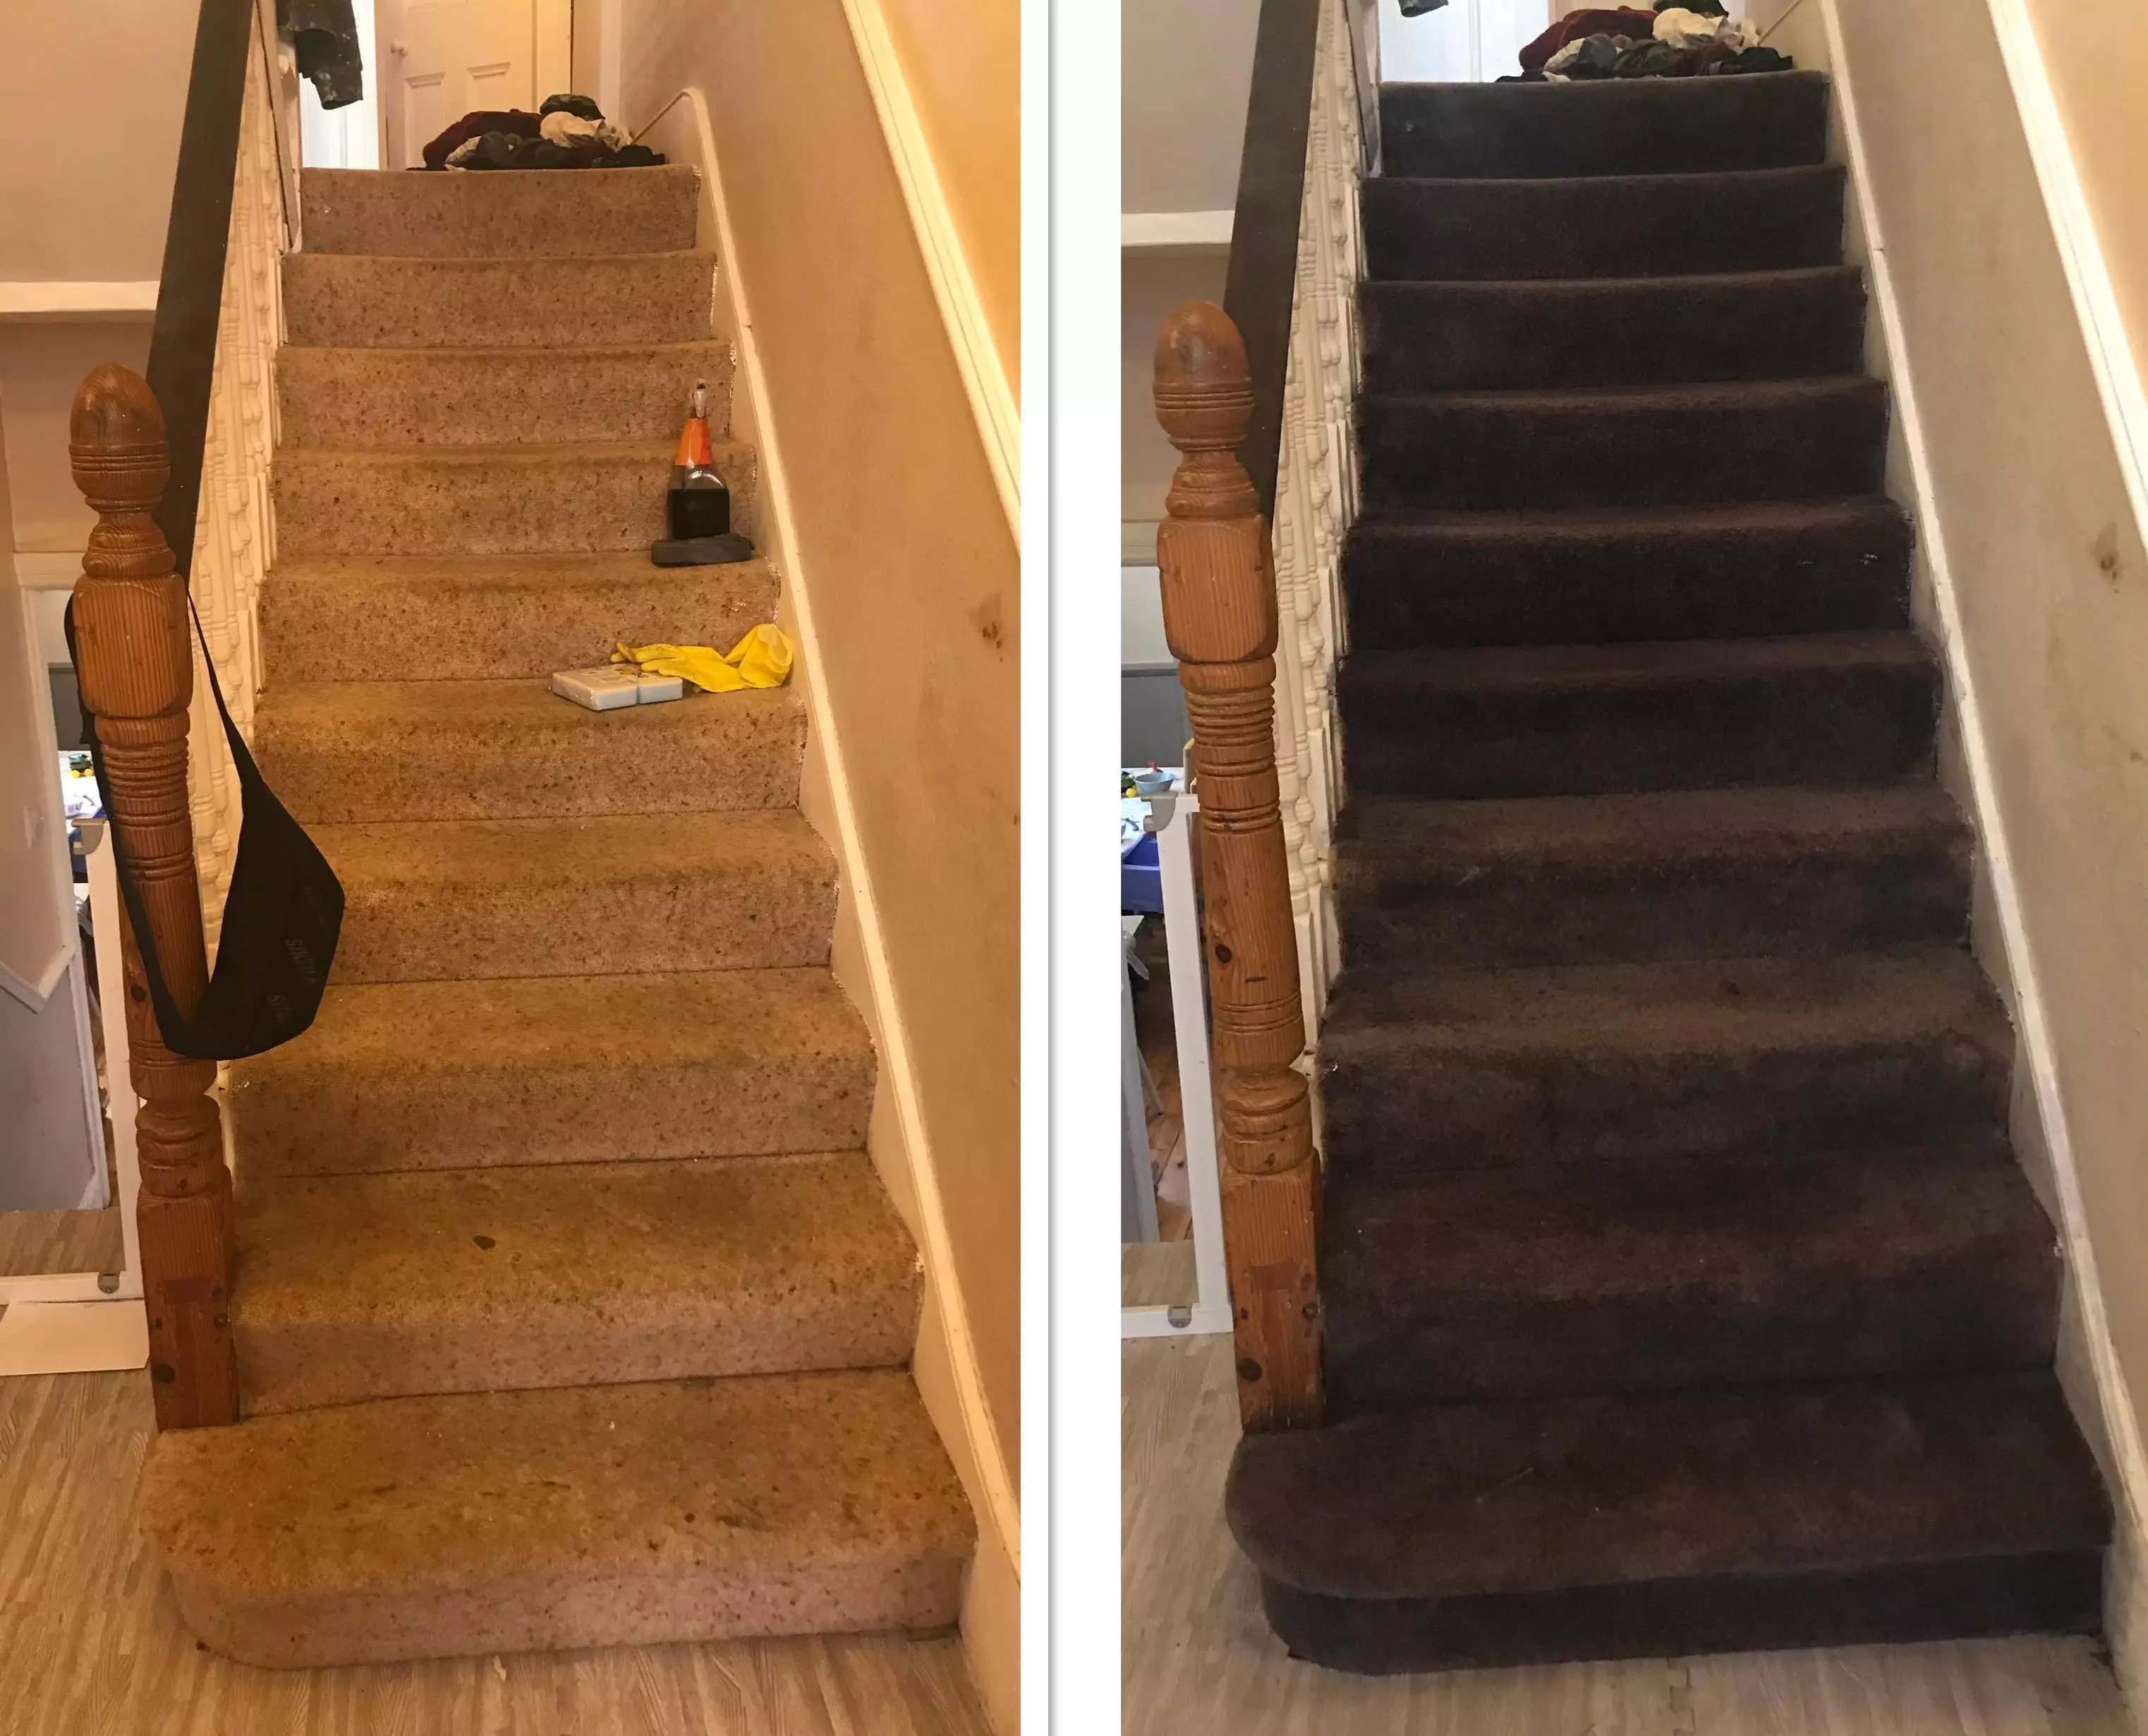 Abbie transformed her staircase with £5 bottles of carpet dye from Wilko (